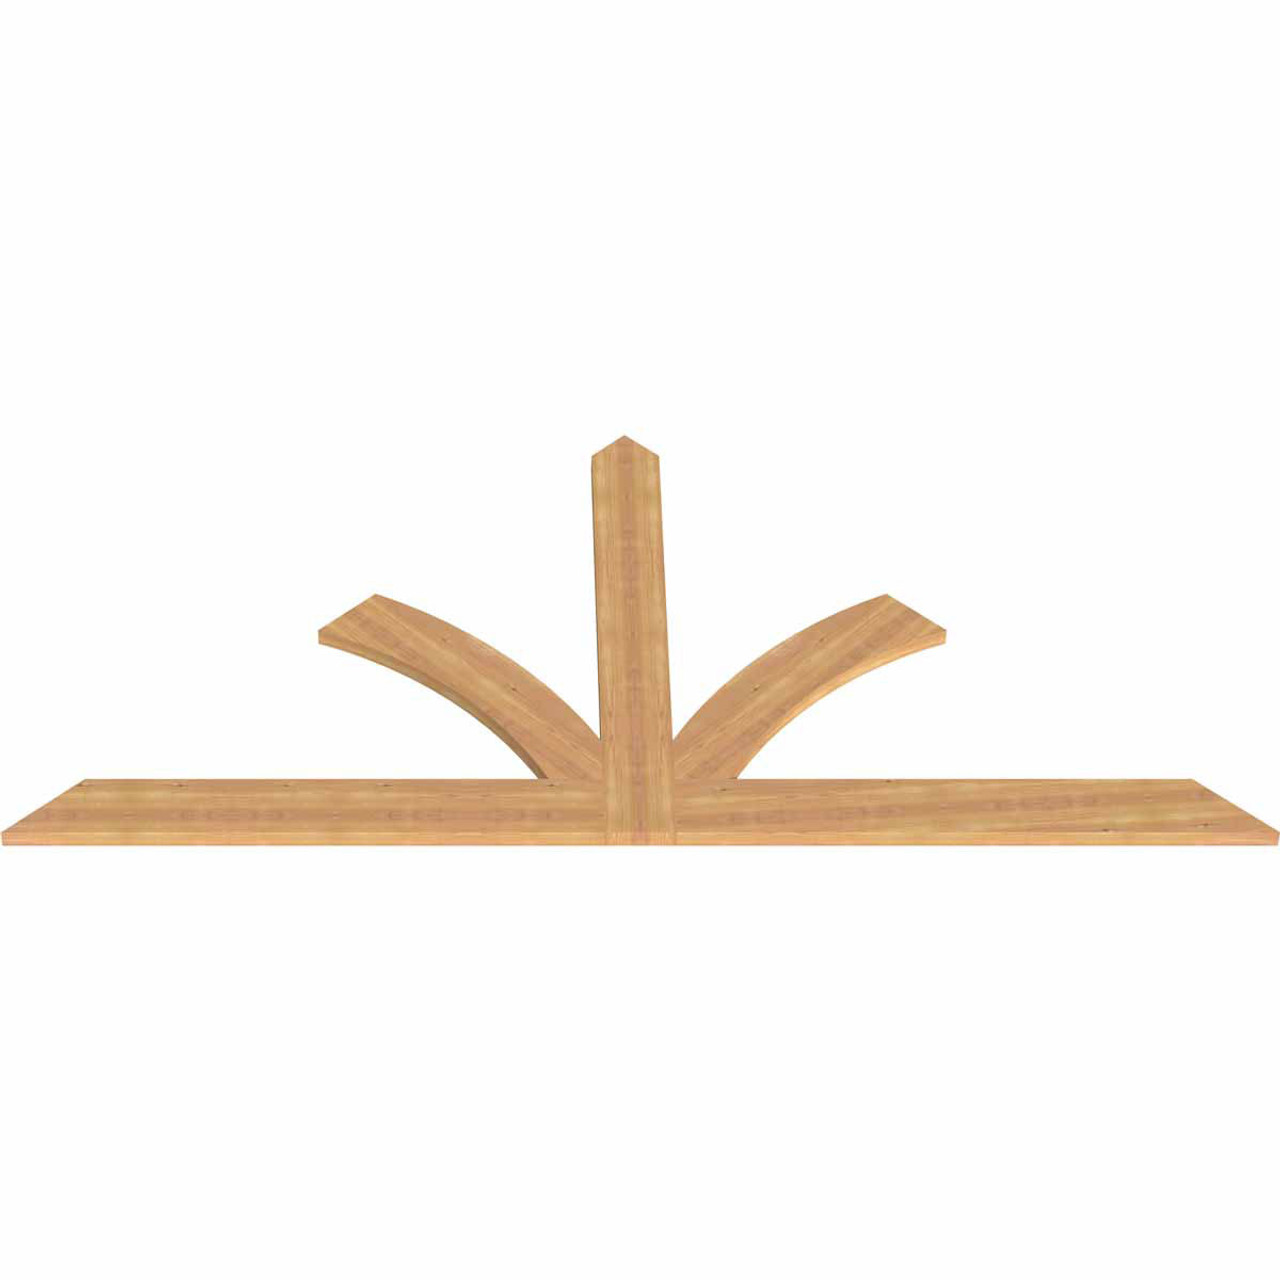 11/12 Pitch Richland Smooth Timber Gable Bracket GBW096X44X0206RIC00SWR